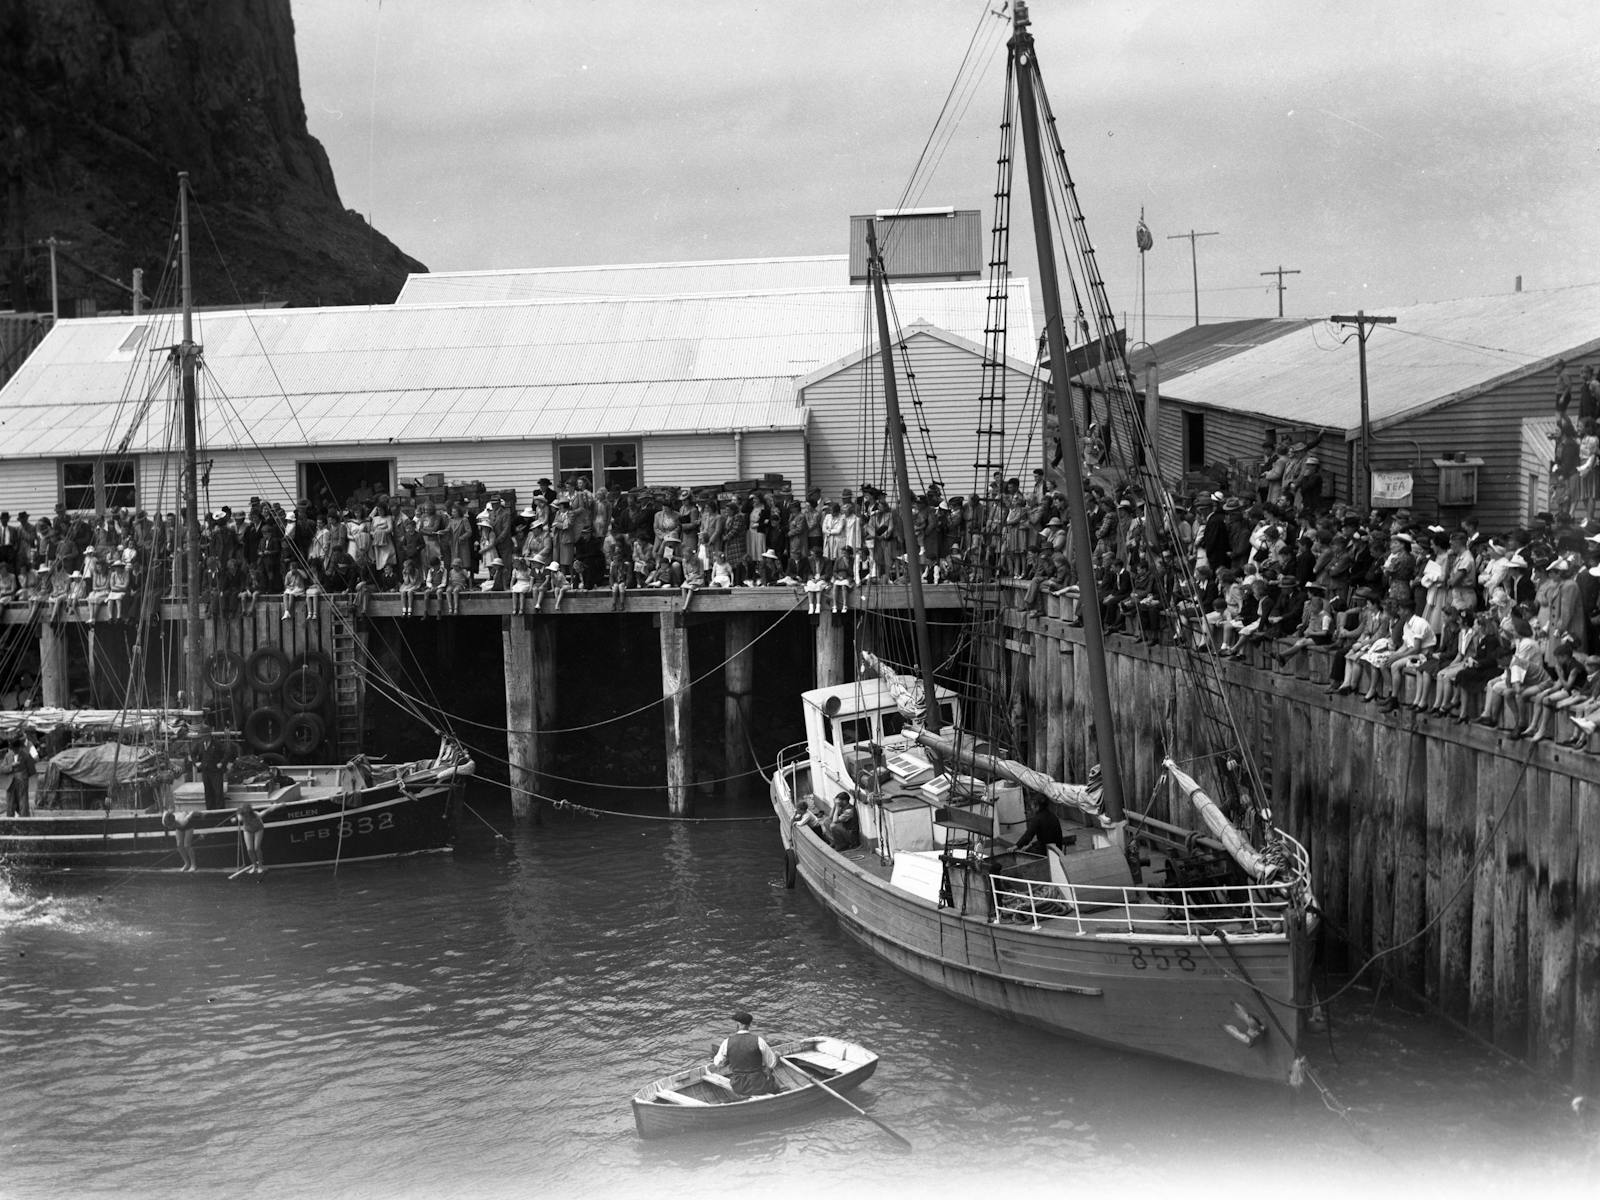 Swimming Race at the Stanley Wharf early 1930's